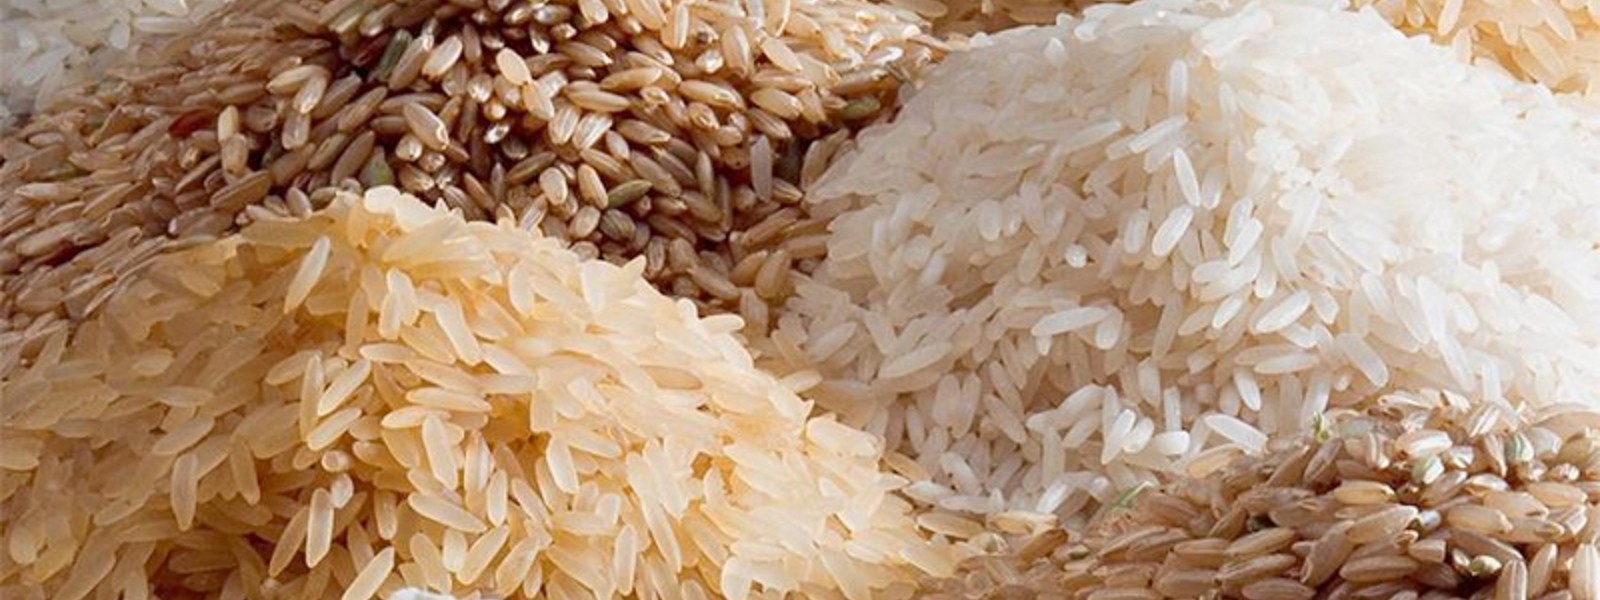 No rice shortage, assures Trade Ministry